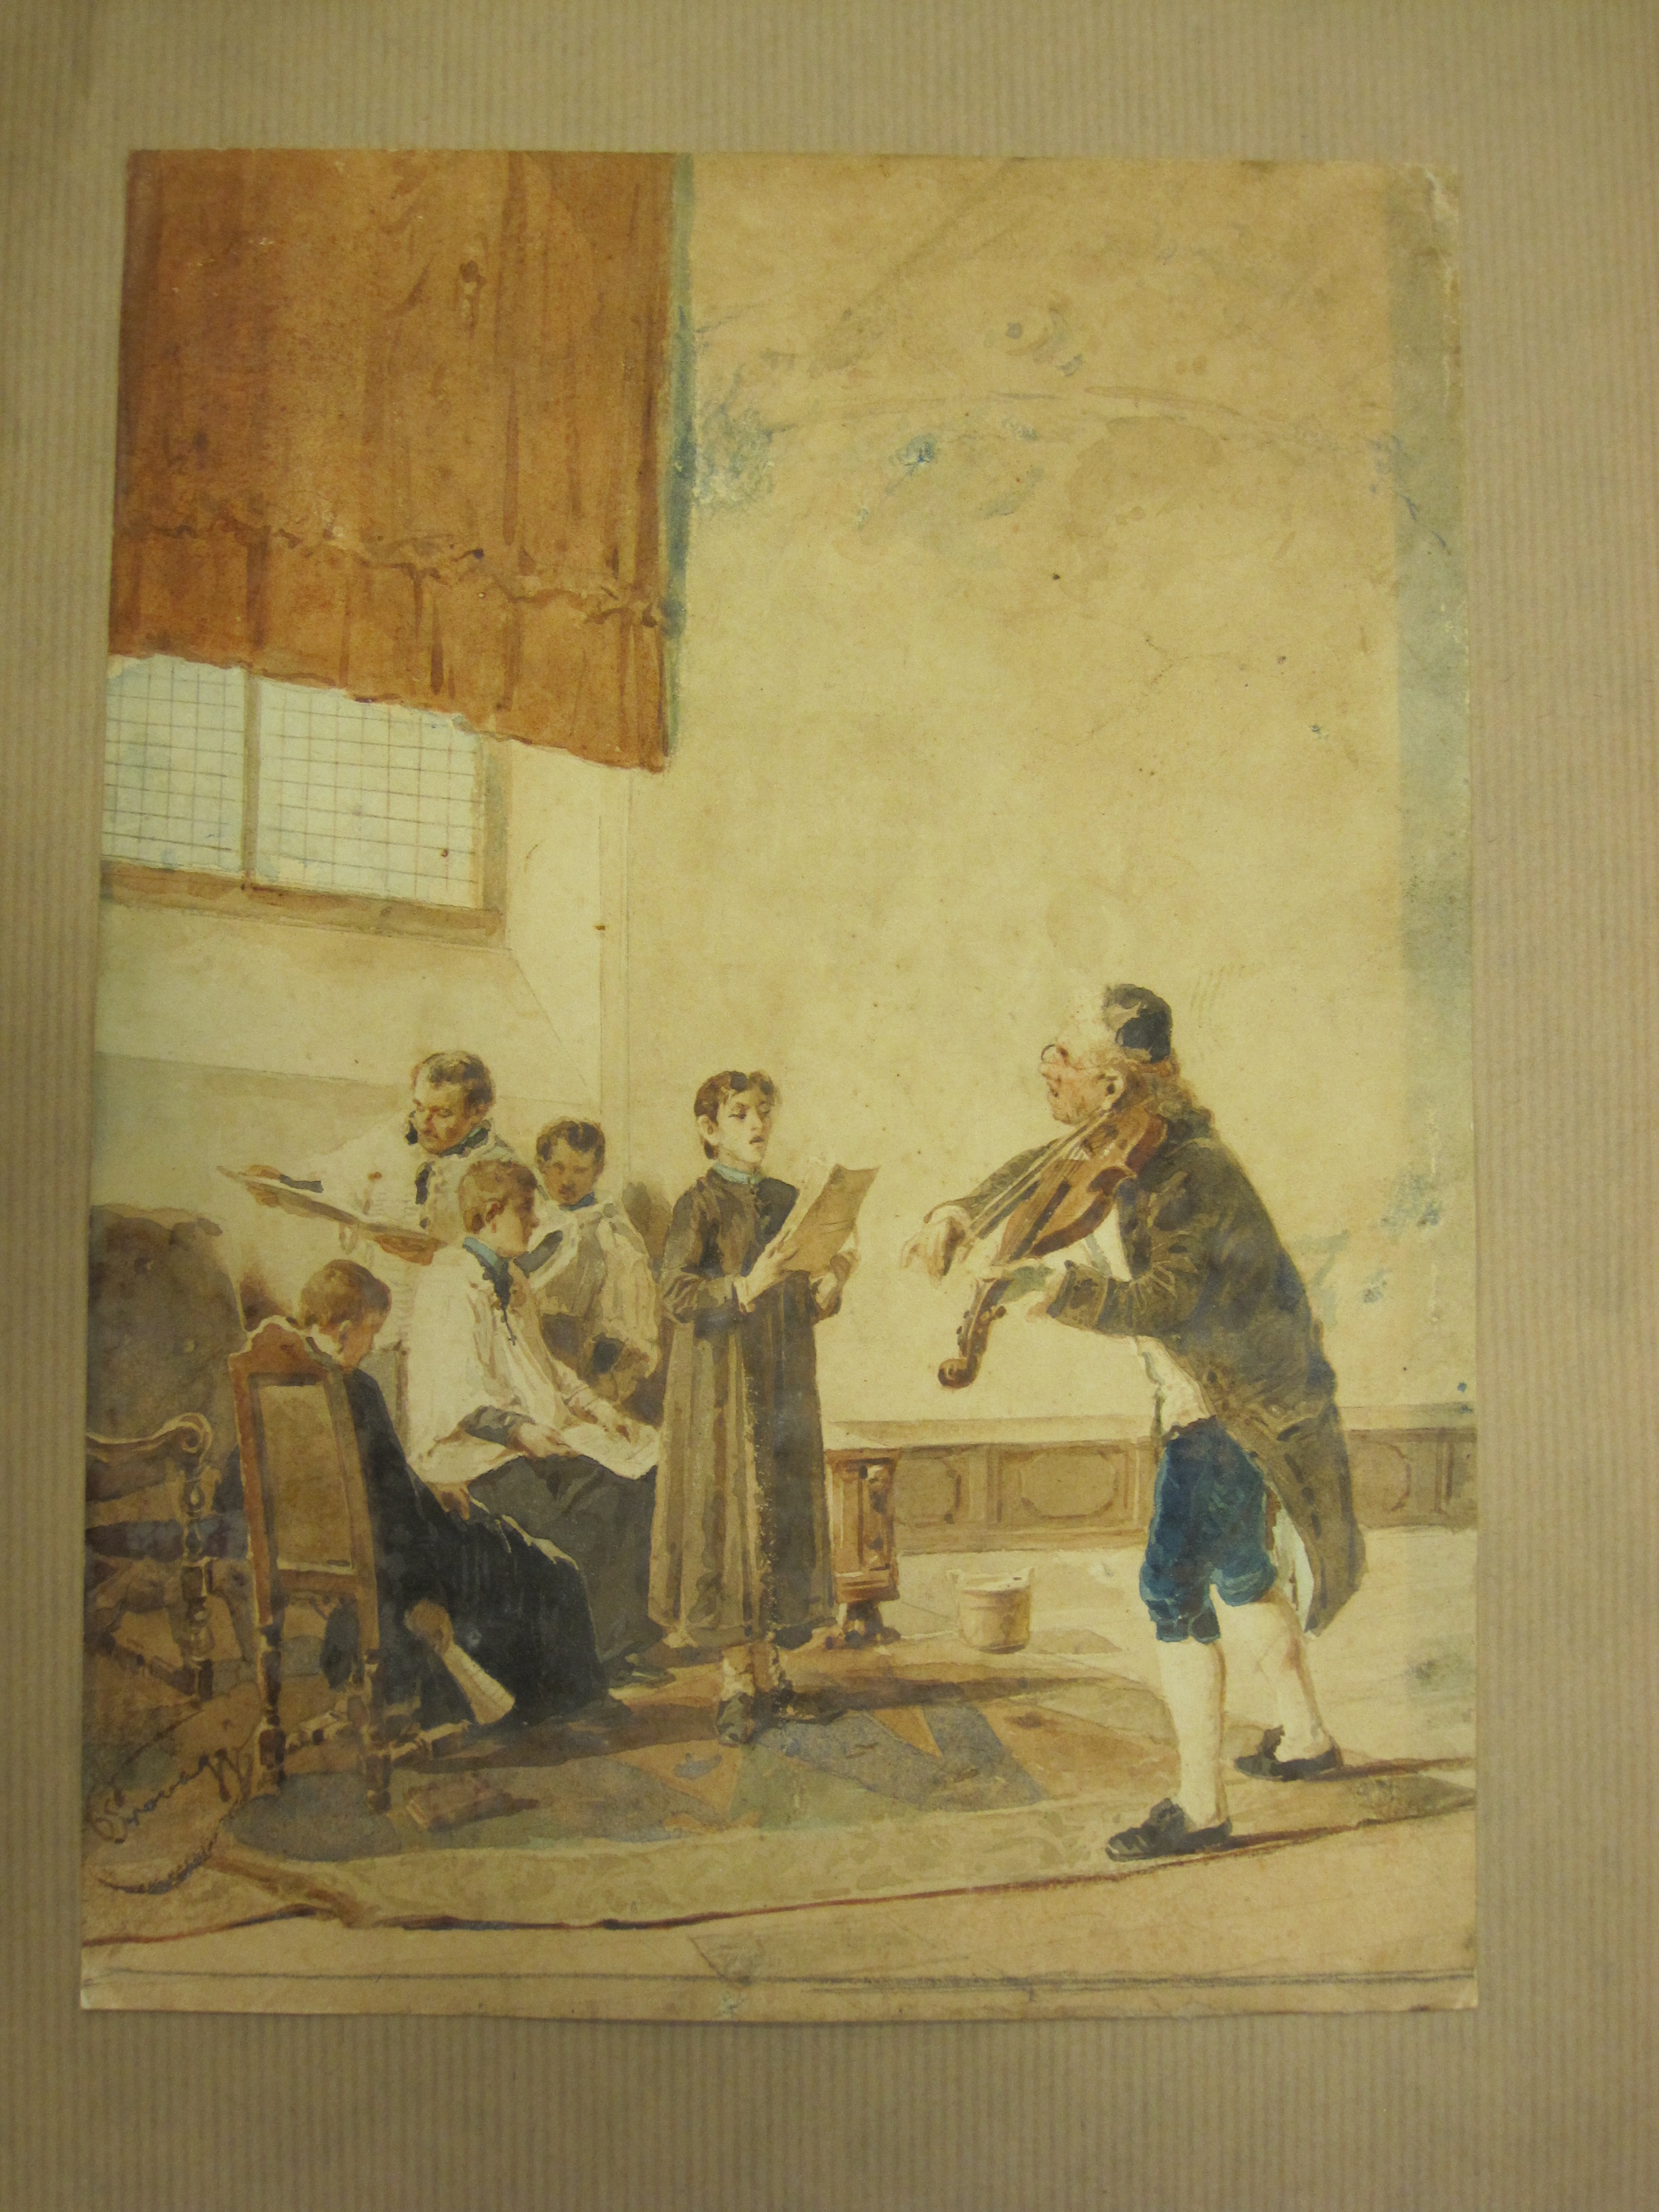 *SCROVAGGI (?) The Music Lesson, indistinctly signed, watercolour, unframed, 10 1/2 x 8 in;¦ and a